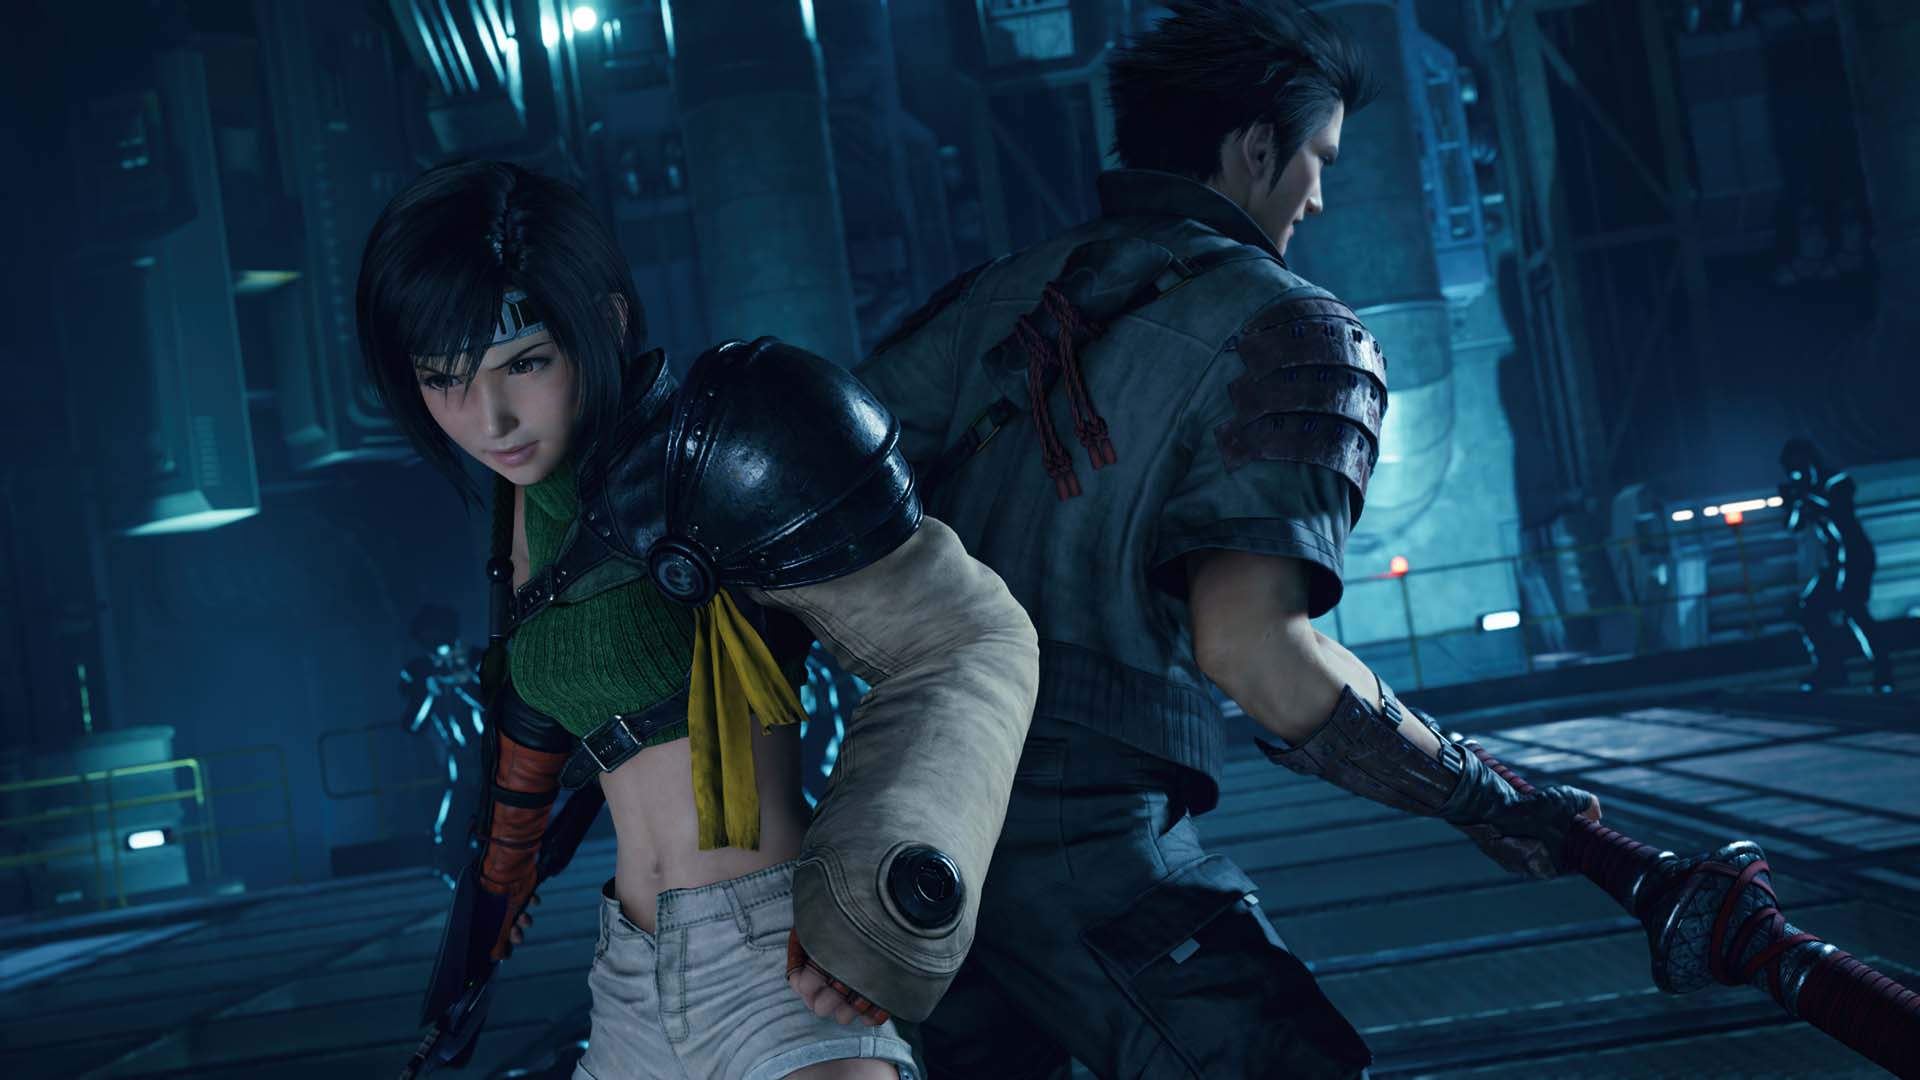 Final Fantasy VII Remake - EPISODE INTERmission (New Story Content Featuring Yuffie) DLC EU PS5 CD Key 11.29 $